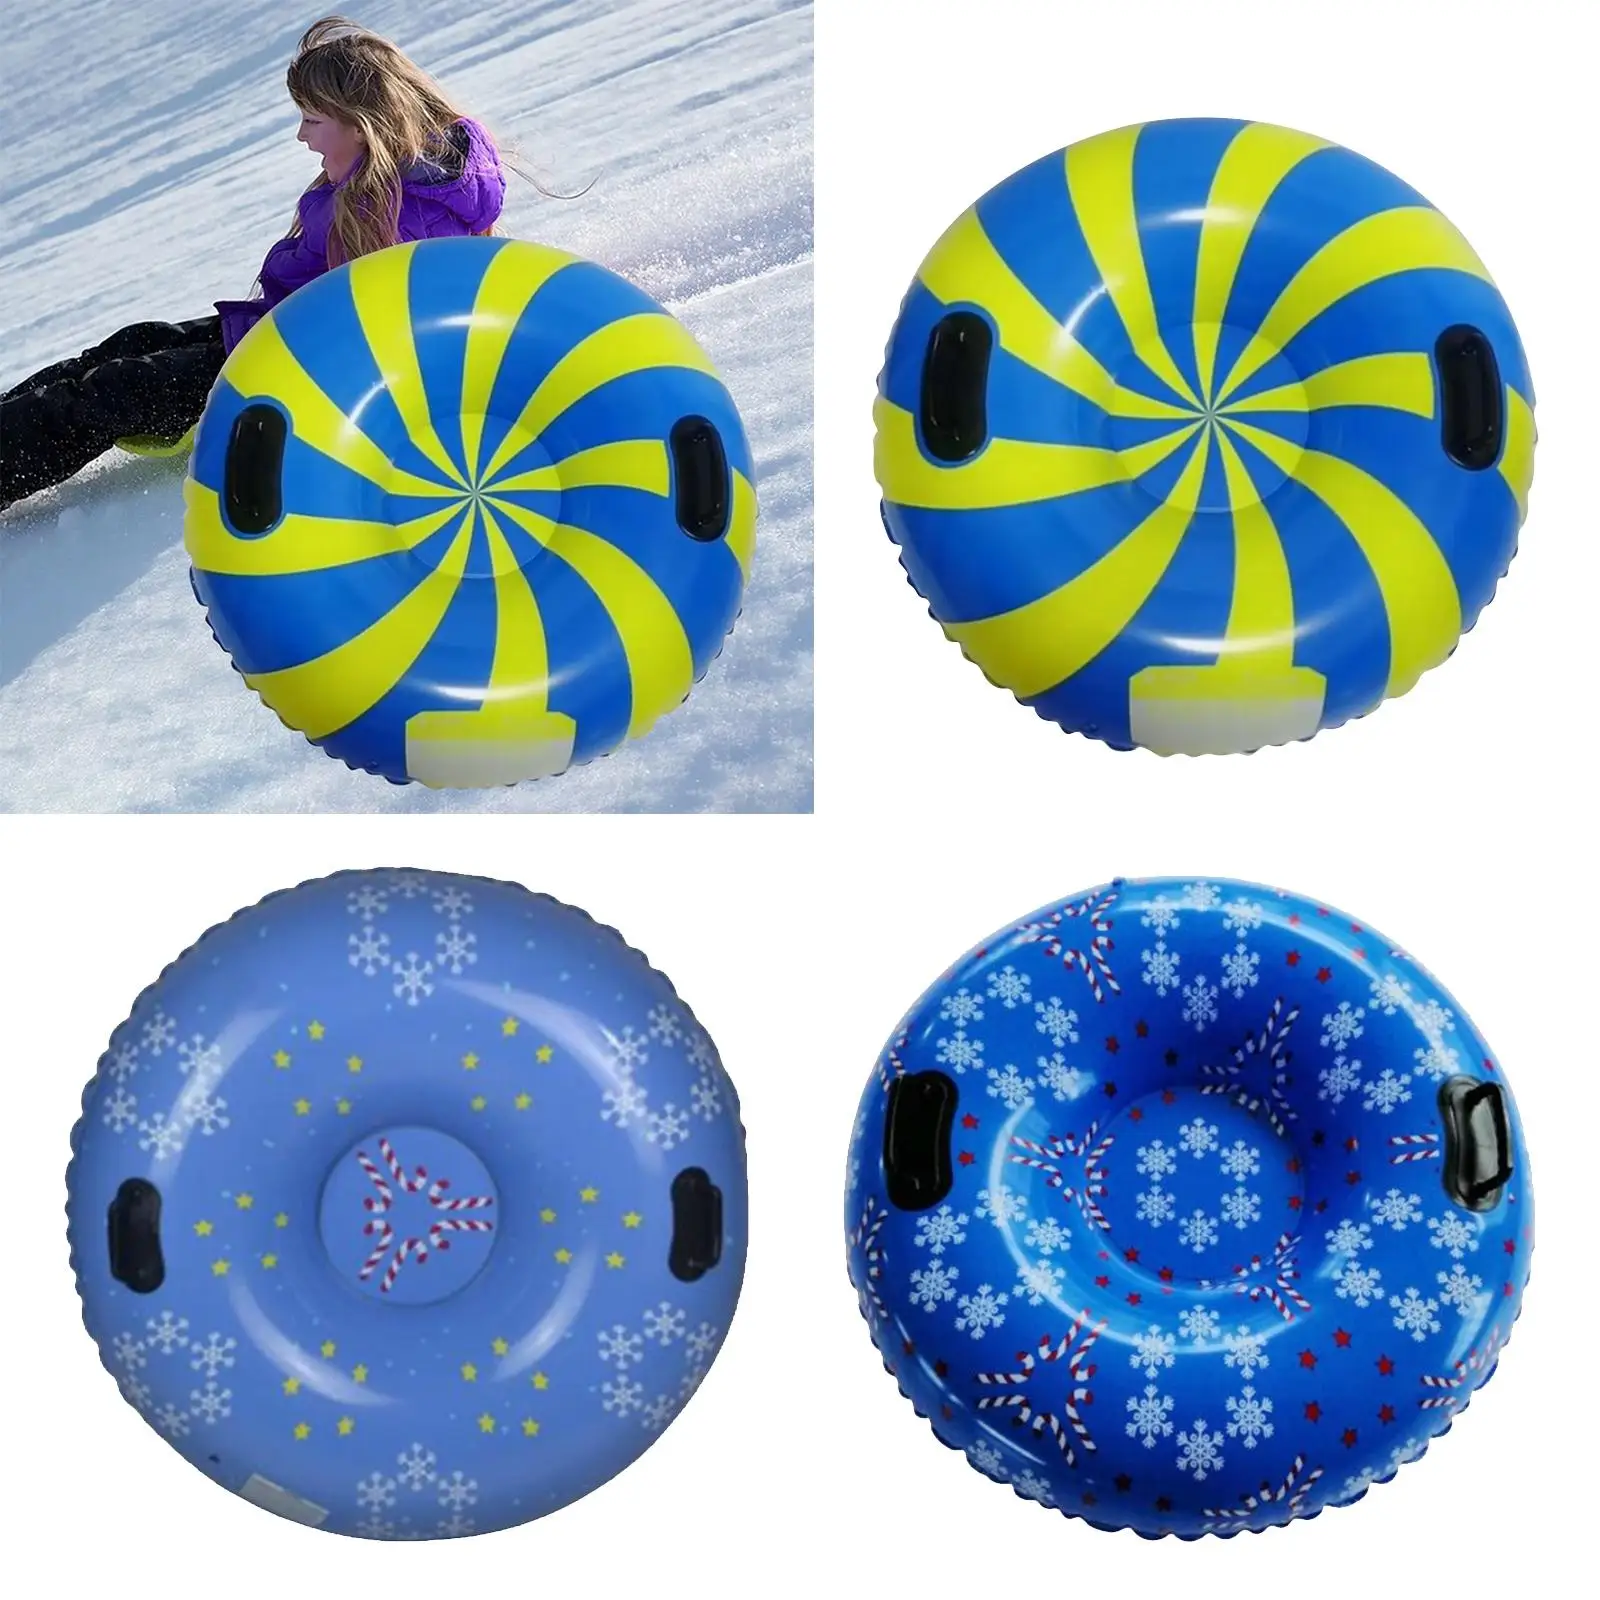 Snow Tubes Thicken Snow Tube for Heavy Steees, Large Inflatable Tube Sleds for Kids Girls